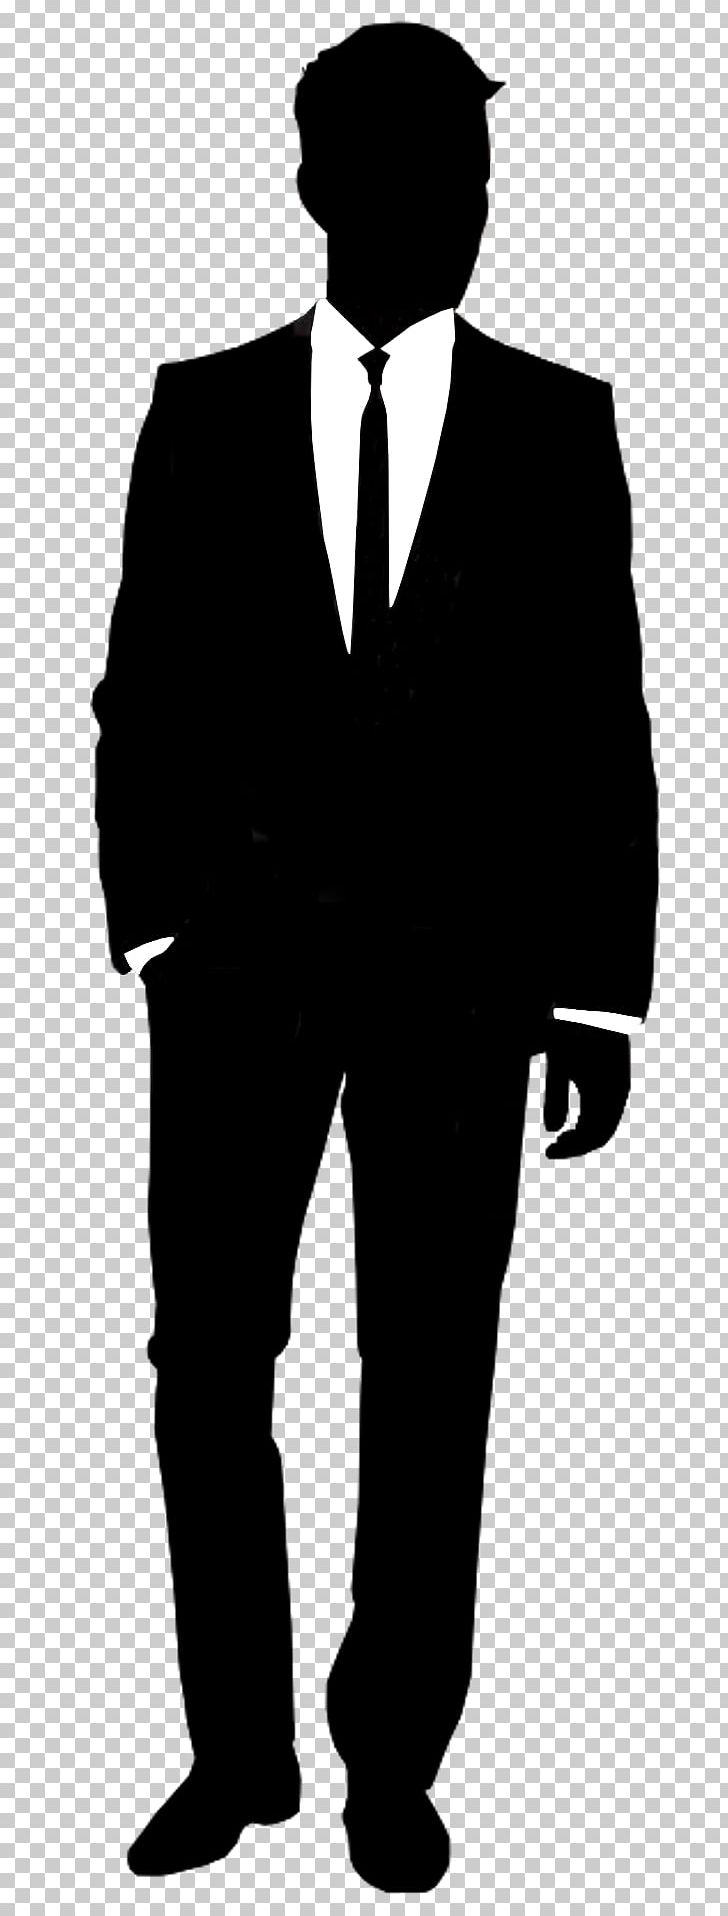 Suit Silhouette Shirt Informal Attire PNG, Clipart, Black And White, Clothing, Dress, Fashion, Formal Wear Free PNG Download